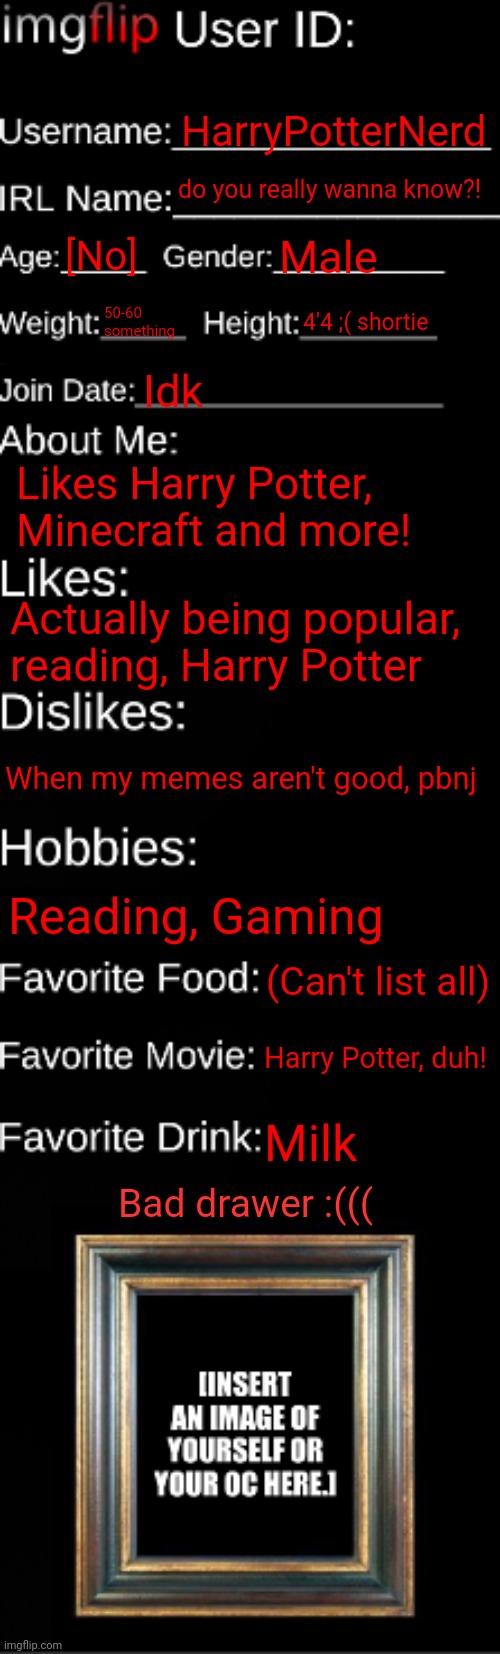 don't you dare make fun of my height... | HarryPotterNerd; do you really wanna know?! [No]; Male; 50-60 something; 4'4 ;( shortie; Idk; Likes Harry Potter, Minecraft and more! Actually being popular, reading, Harry Potter; When my memes aren't good, pbnj; Reading, Gaming; (Can't list all); Harry Potter, duh! Milk; Bad drawer :((( | image tagged in height,imgflip id card,funny,lol,memes,bruh | made w/ Imgflip meme maker